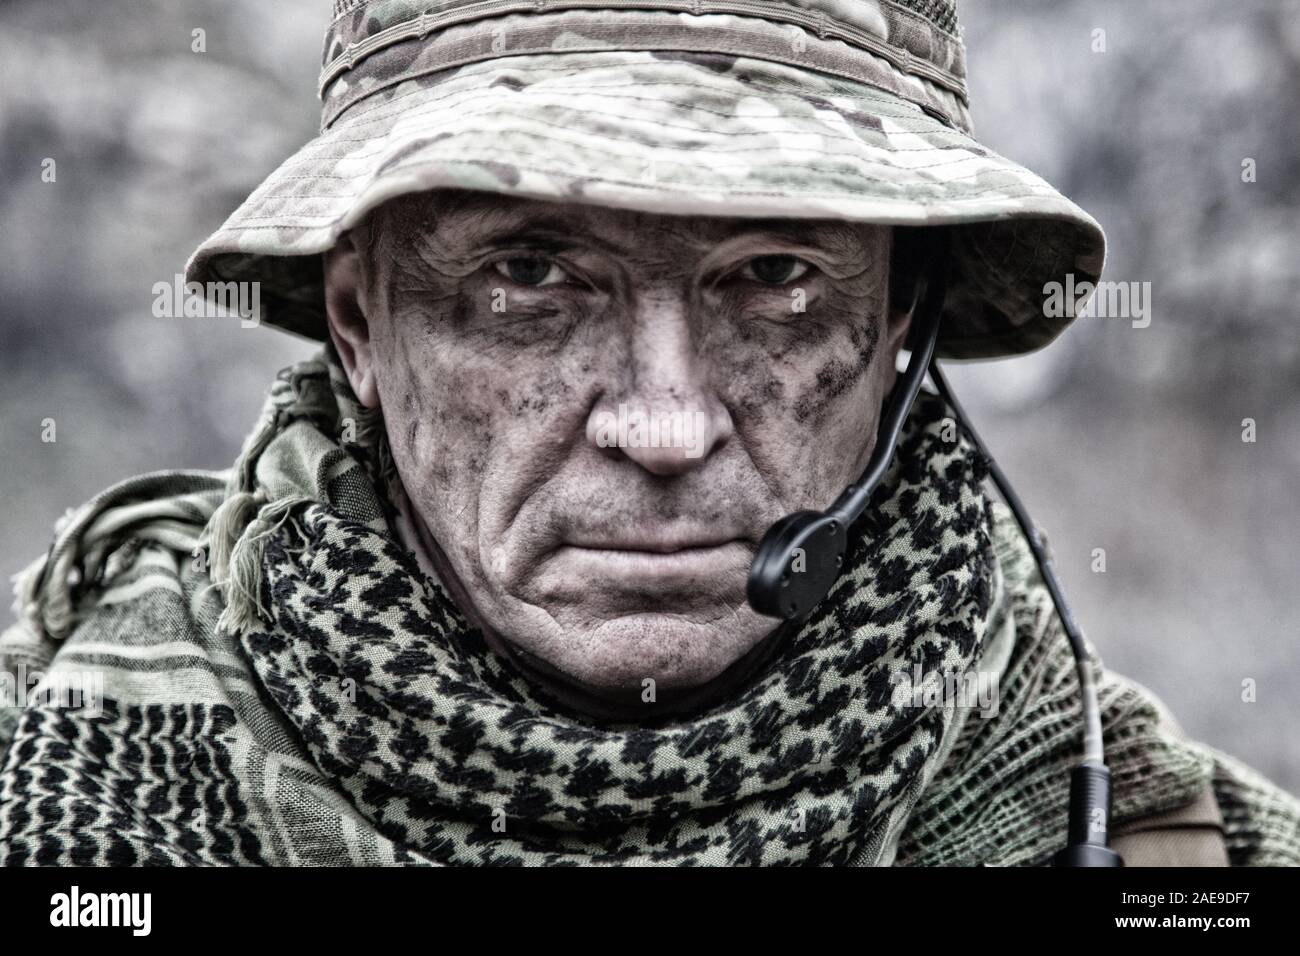 Experienced military army soldier commander close-up portrait Stock Photo